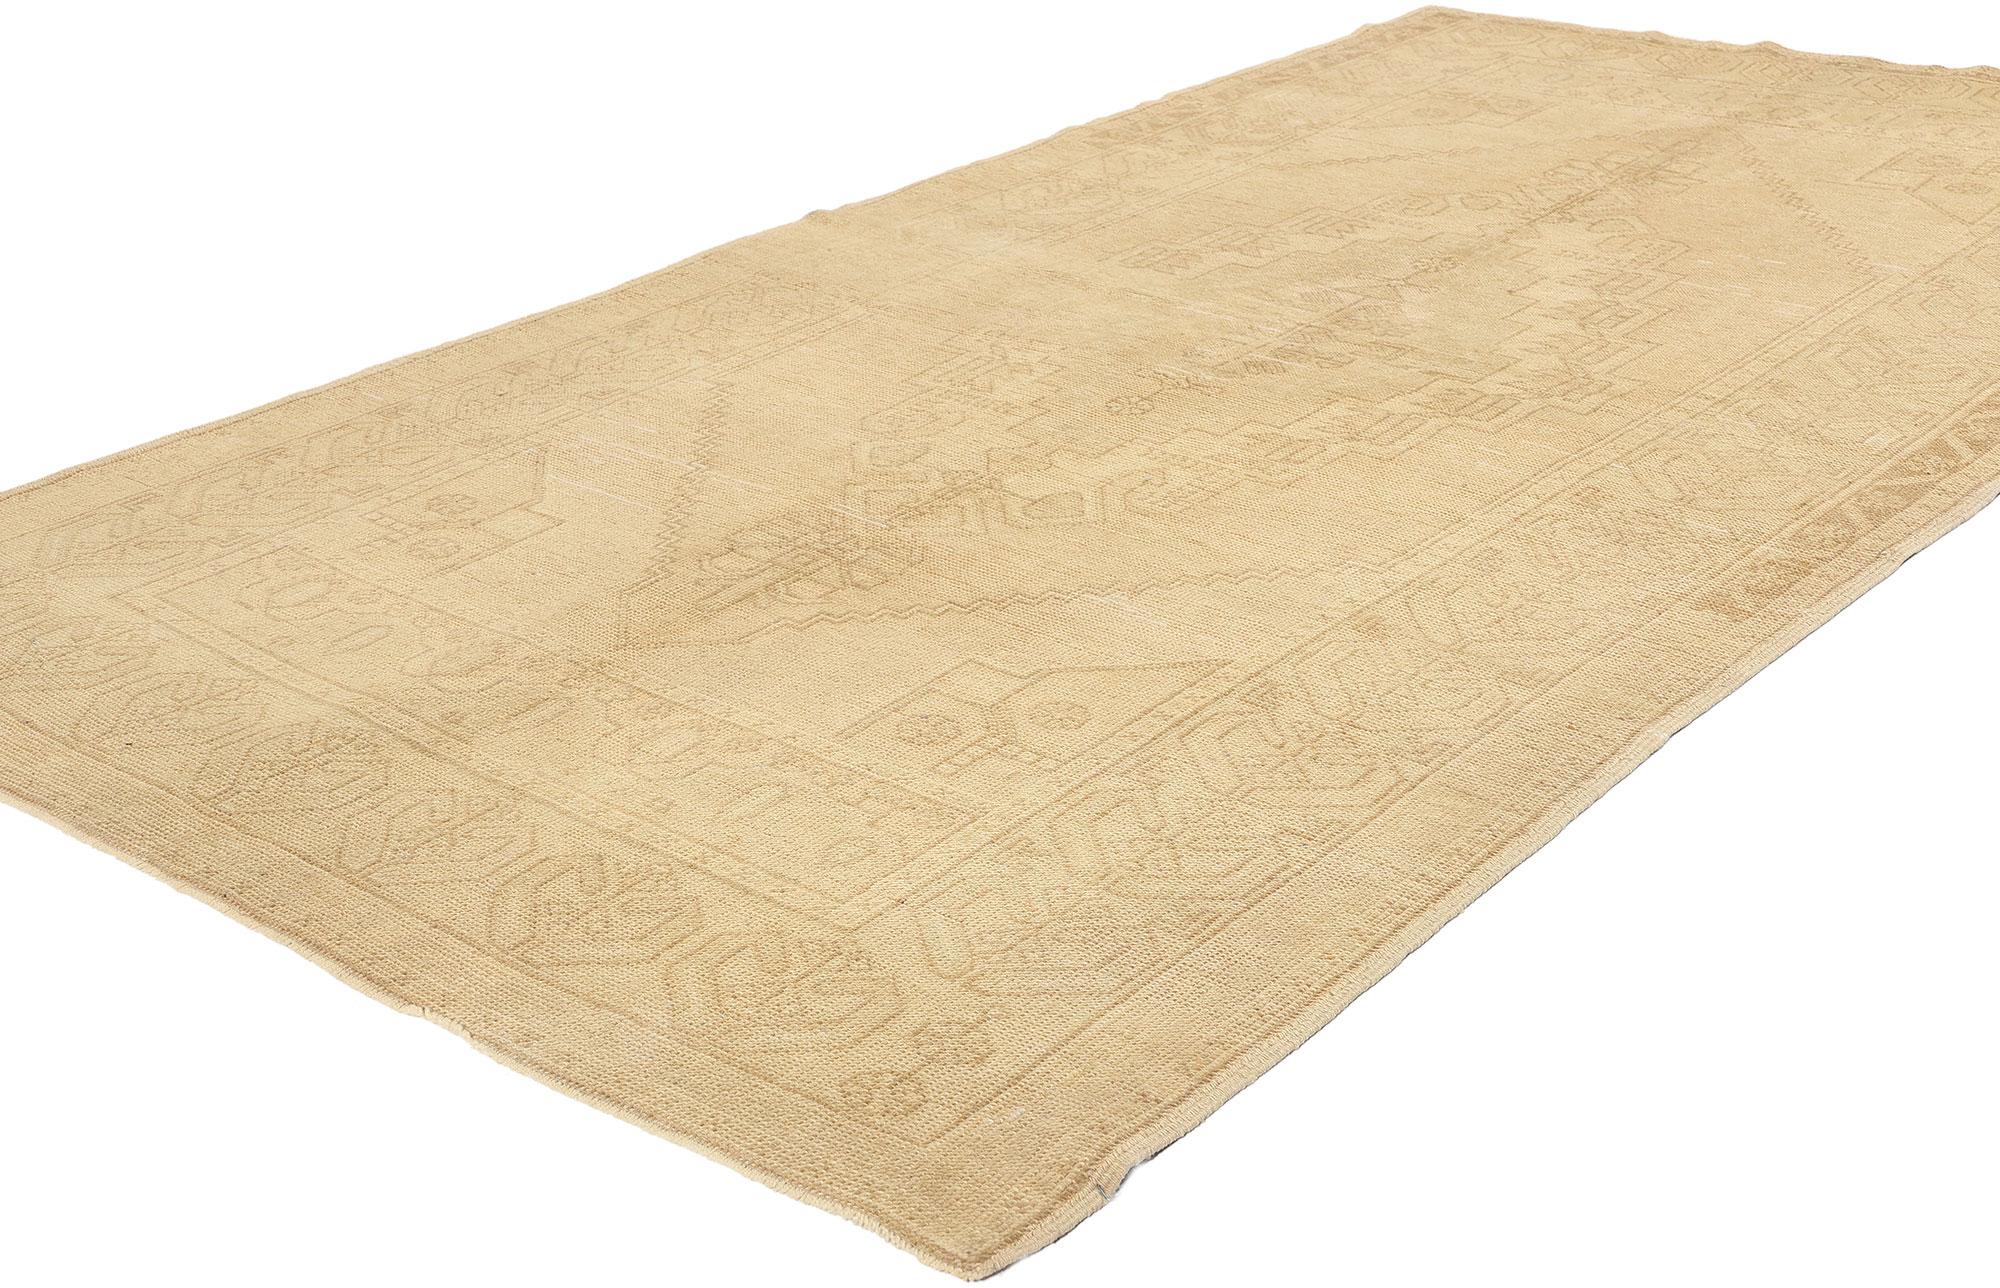 52184 Vintage Muted Turkish Oushak Rug, 04'04 x 07'10. Immersed in age-old tradition and meticulous artisanal craftsmanship, antique-washed Turkish Oushak rugs hail from the revered Oushak region, where they undergo a meticulous washing process that